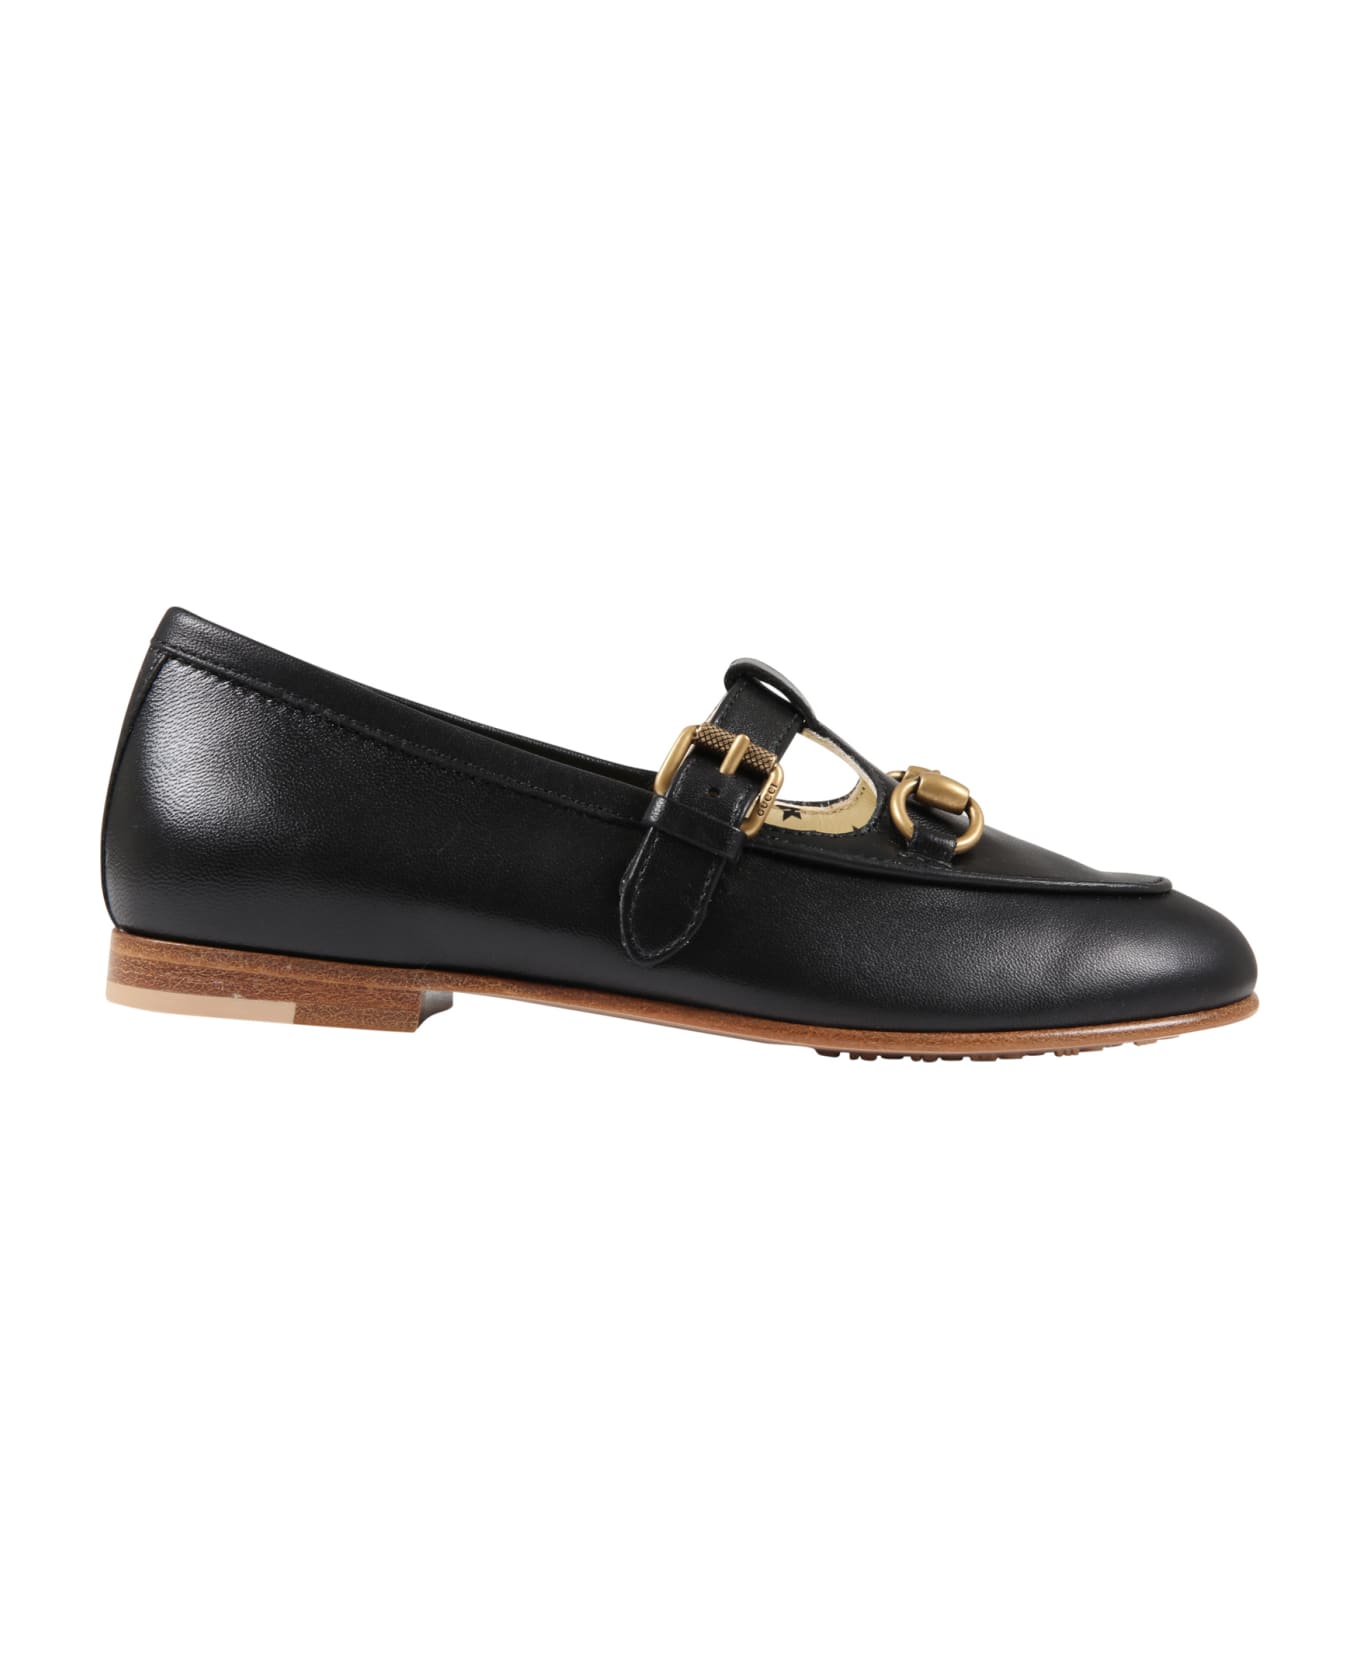 Gucci Black Loafers For Kids With Horsebit - Black